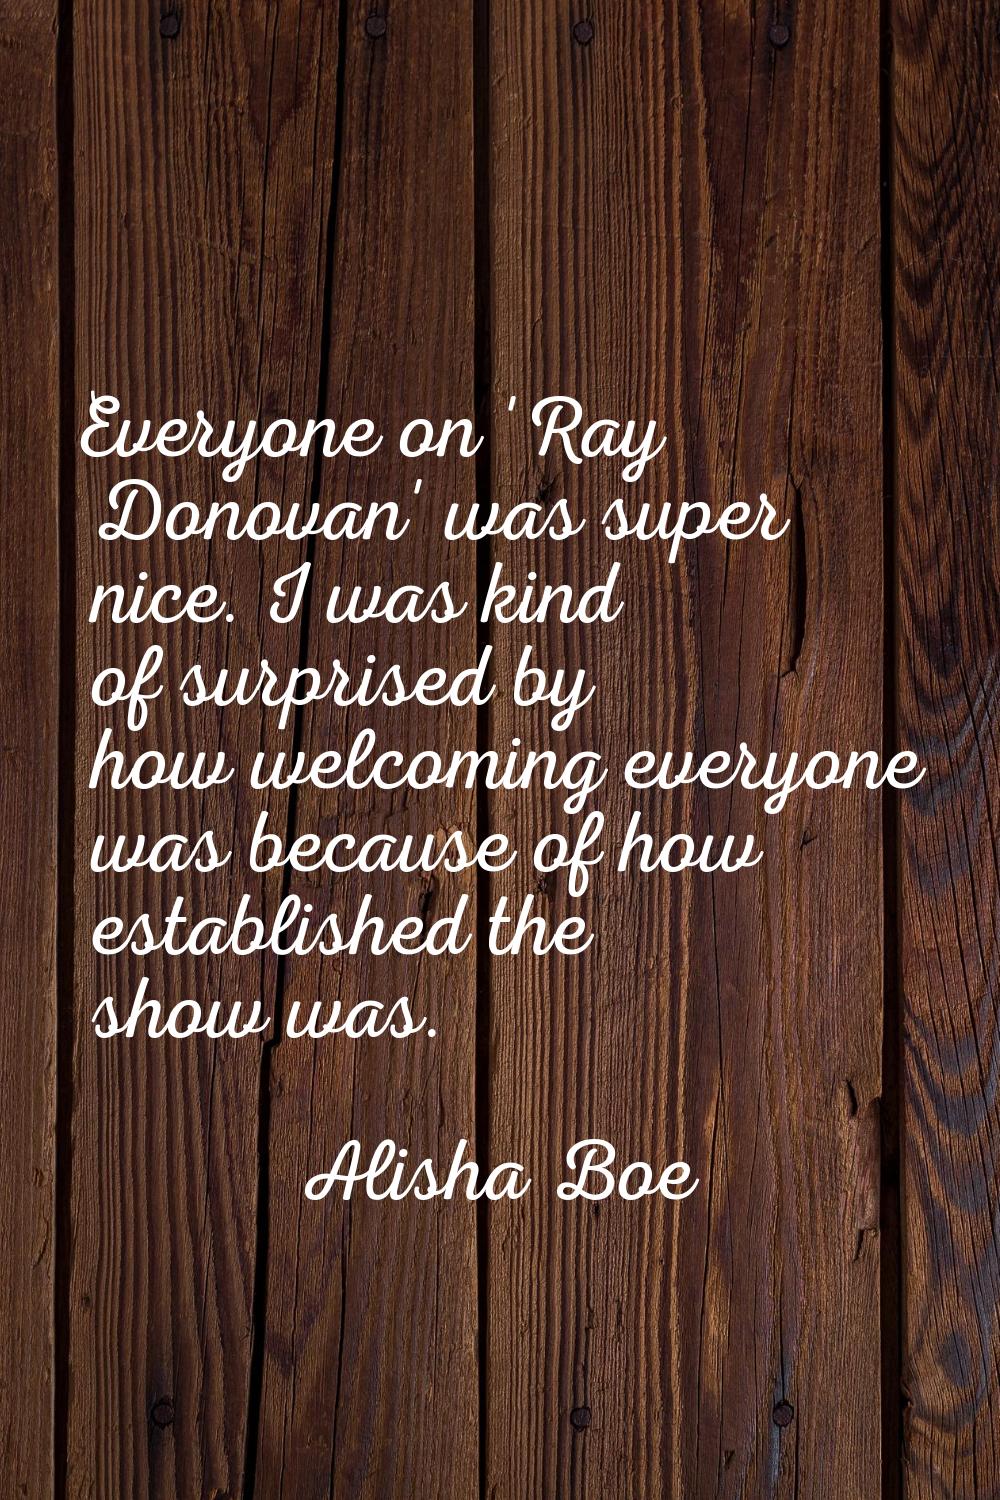 Everyone on 'Ray Donovan' was super nice. I was kind of surprised by how welcoming everyone was bec